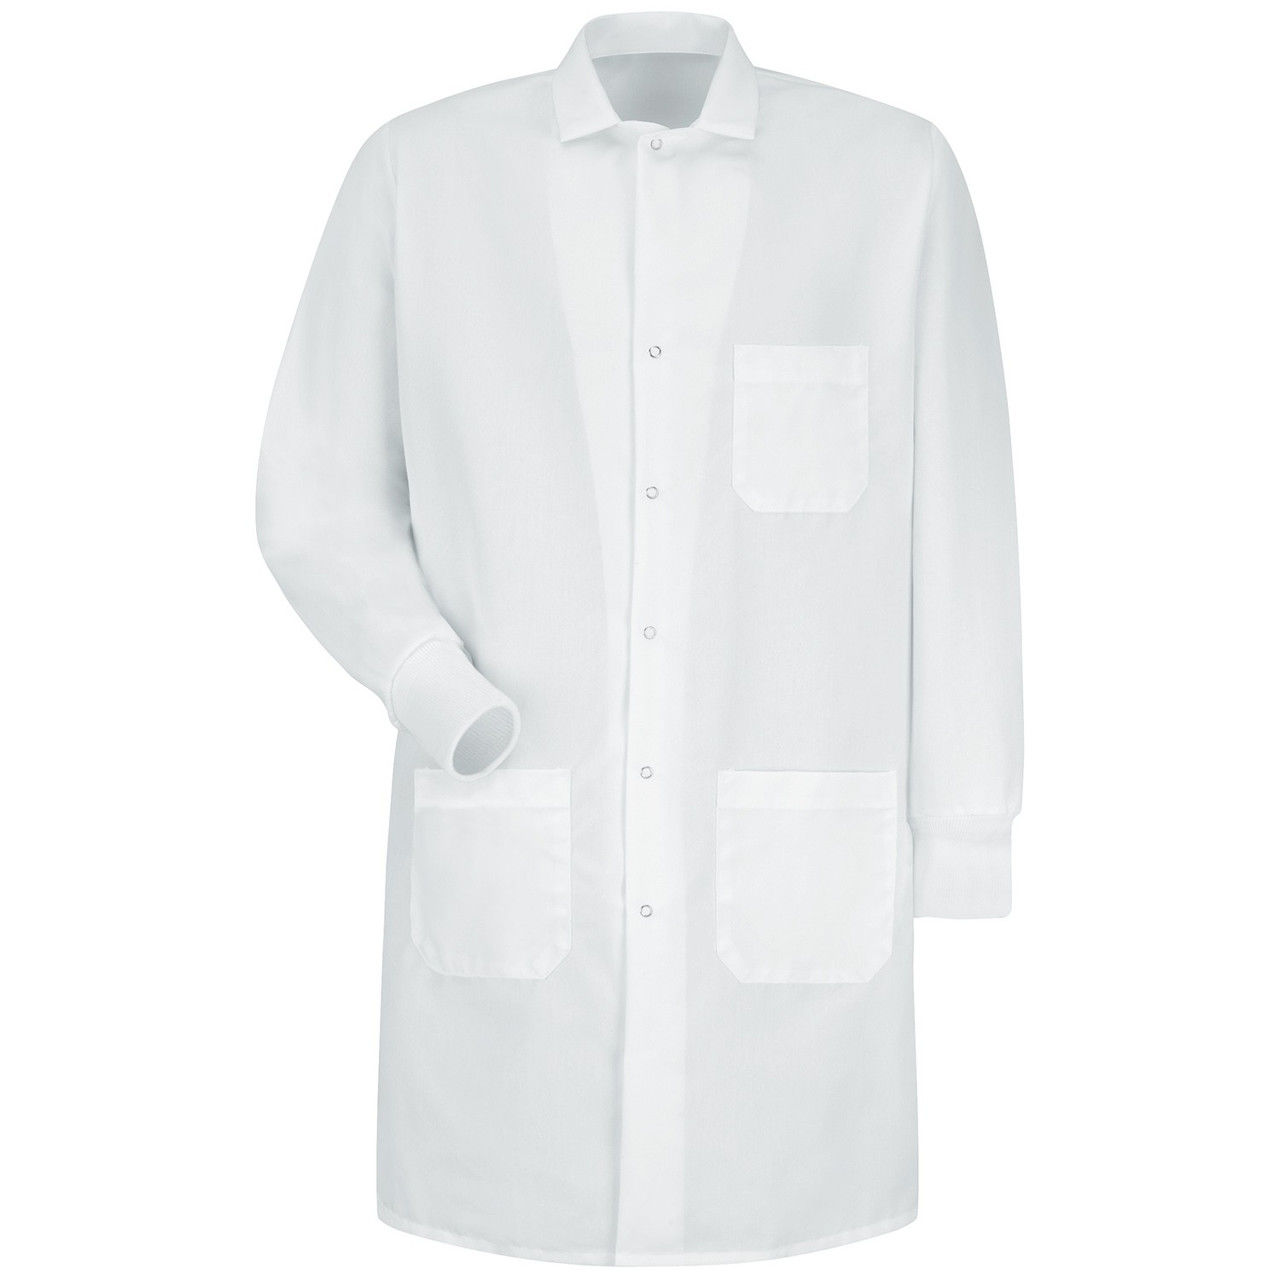 Does the cuffed lab coat have a matte or glossy finish?